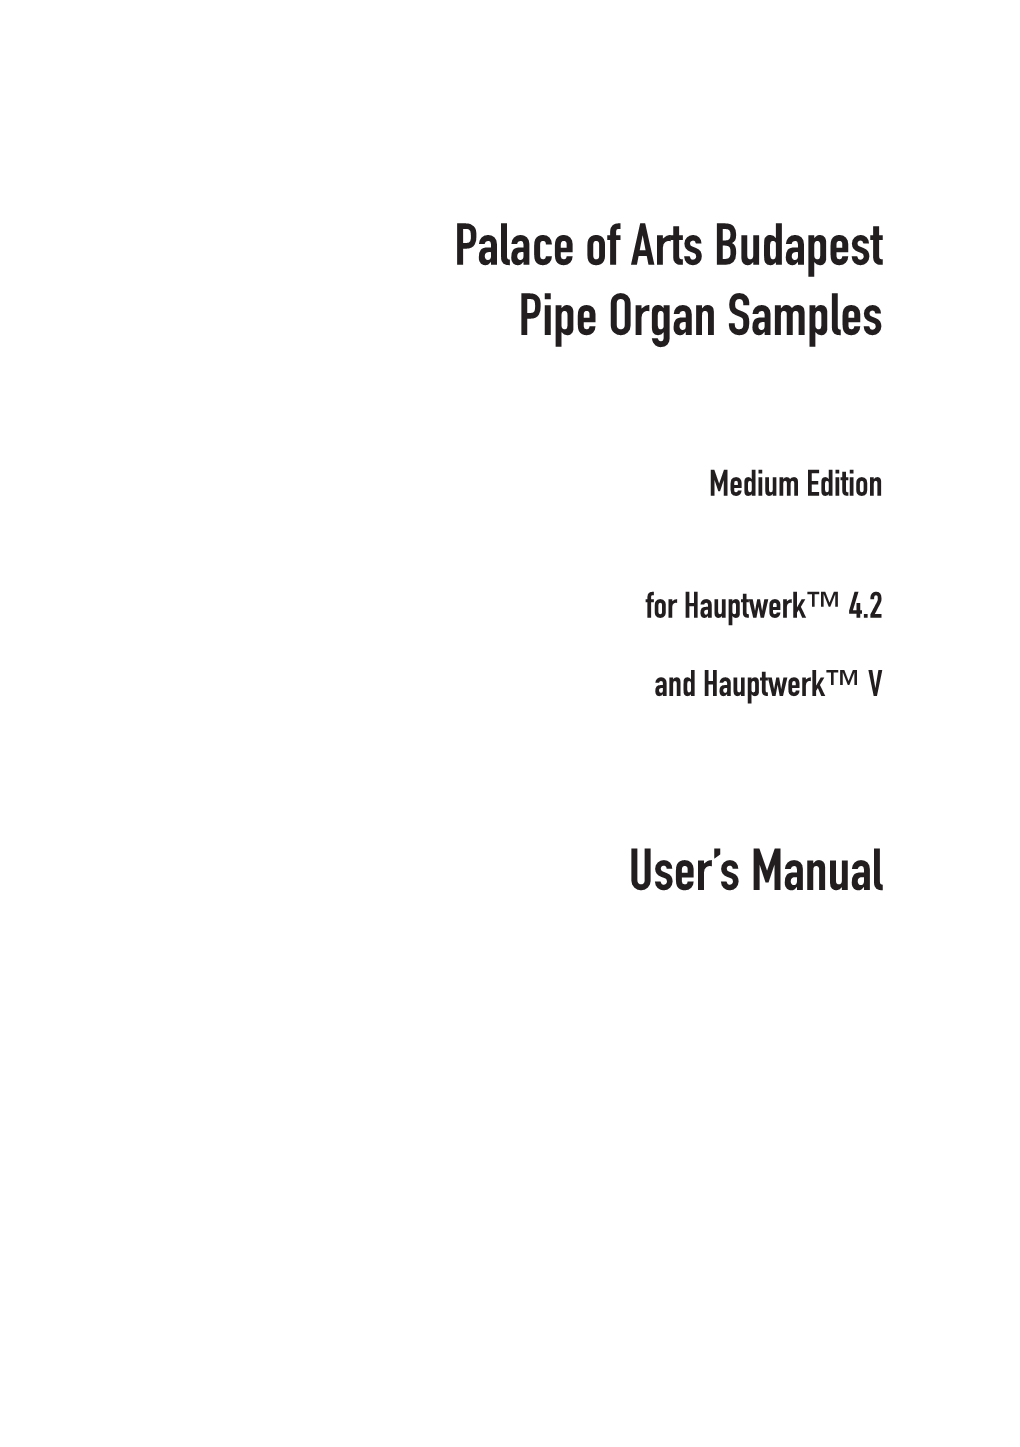 Palace of Arts Budapest Pipe Organ Samples User's Manual